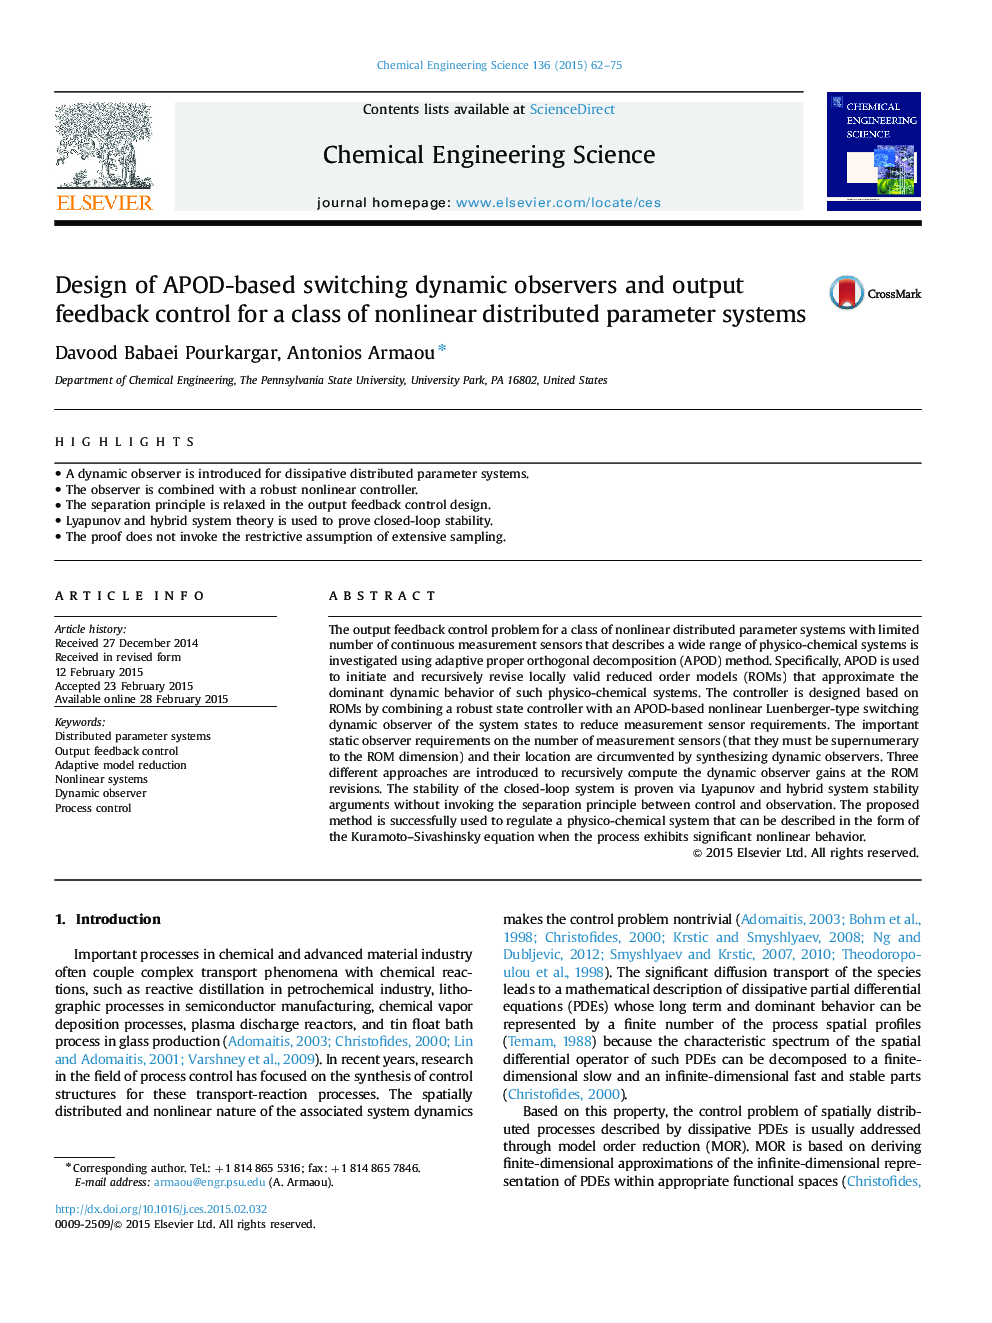 Design of APOD-based switching dynamic observers and output feedback control for a class of nonlinear distributed parameter systems